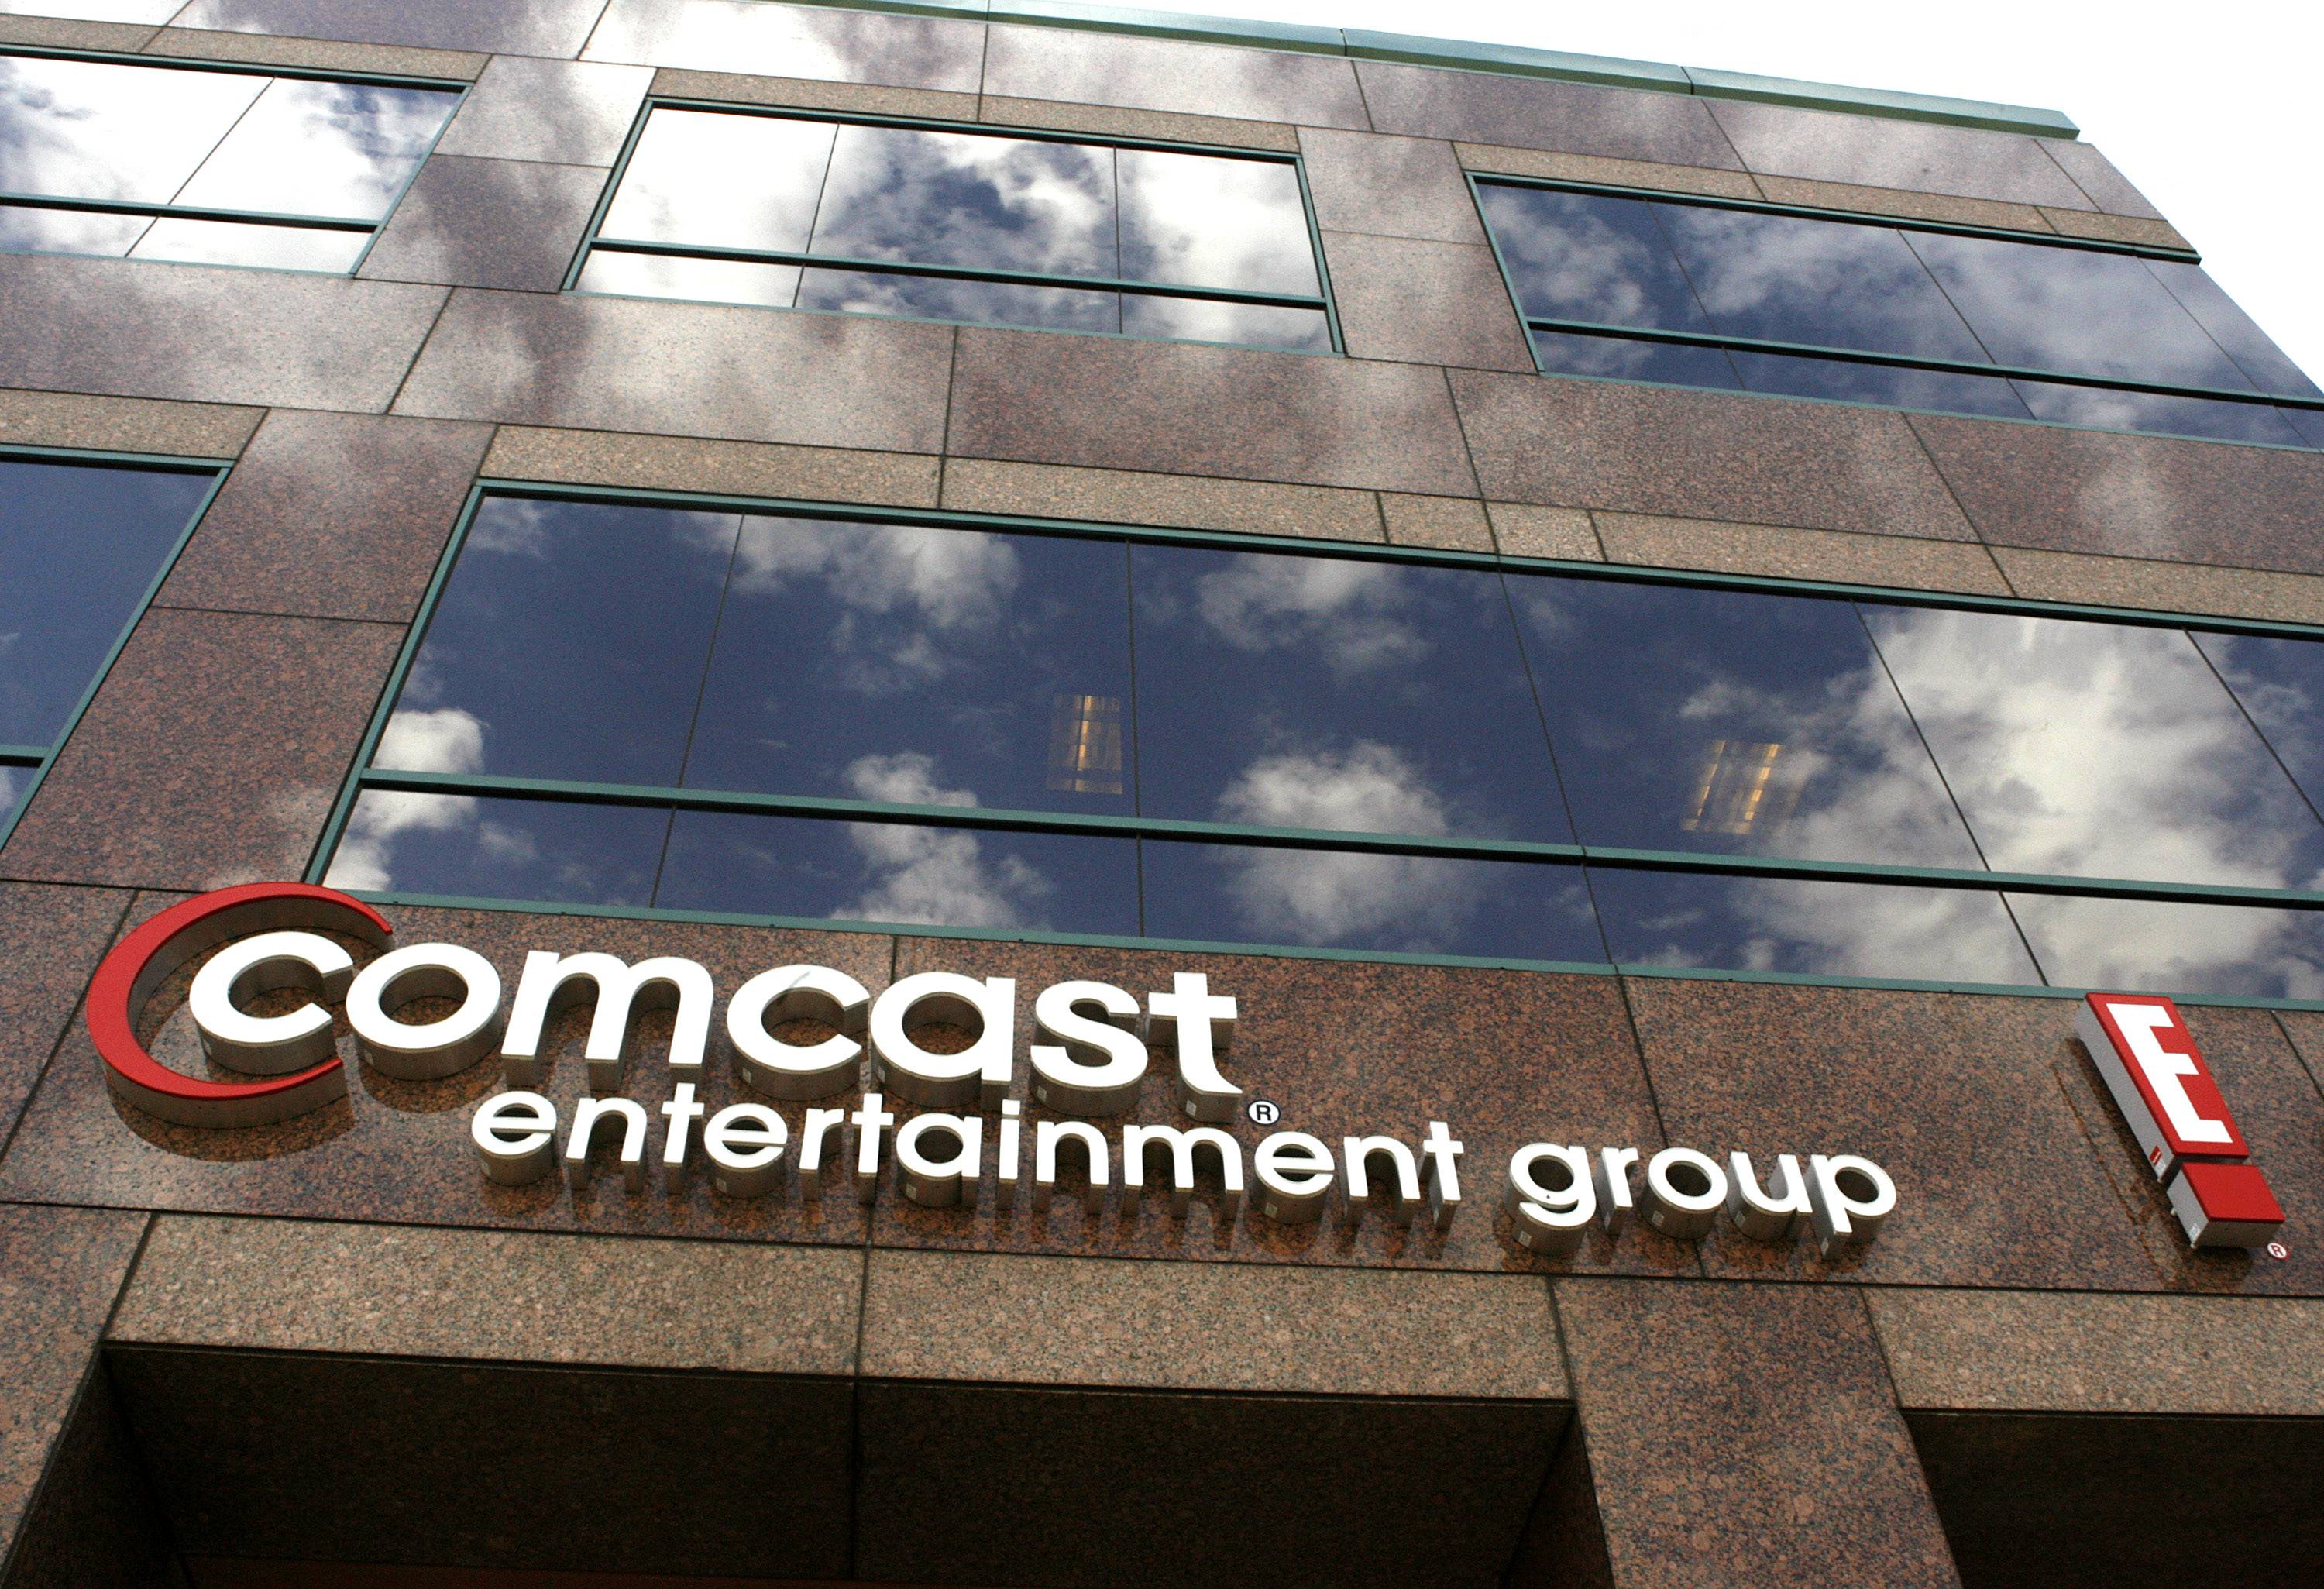 Comcast Tangled in Discrimination Suit - In November 2011, several Black employees of Comcast on Chicago’s South Side said they were required to install roach-infested and broken cable TV equipment in the homes of the predominately Black customers who lived in the area, allegedly because managers told them the customers were less likely to pay their bills and would be &quot;evicted in a few months.” &nbsp;&nbsp;(Photo: Fred Prouser/Reuters)